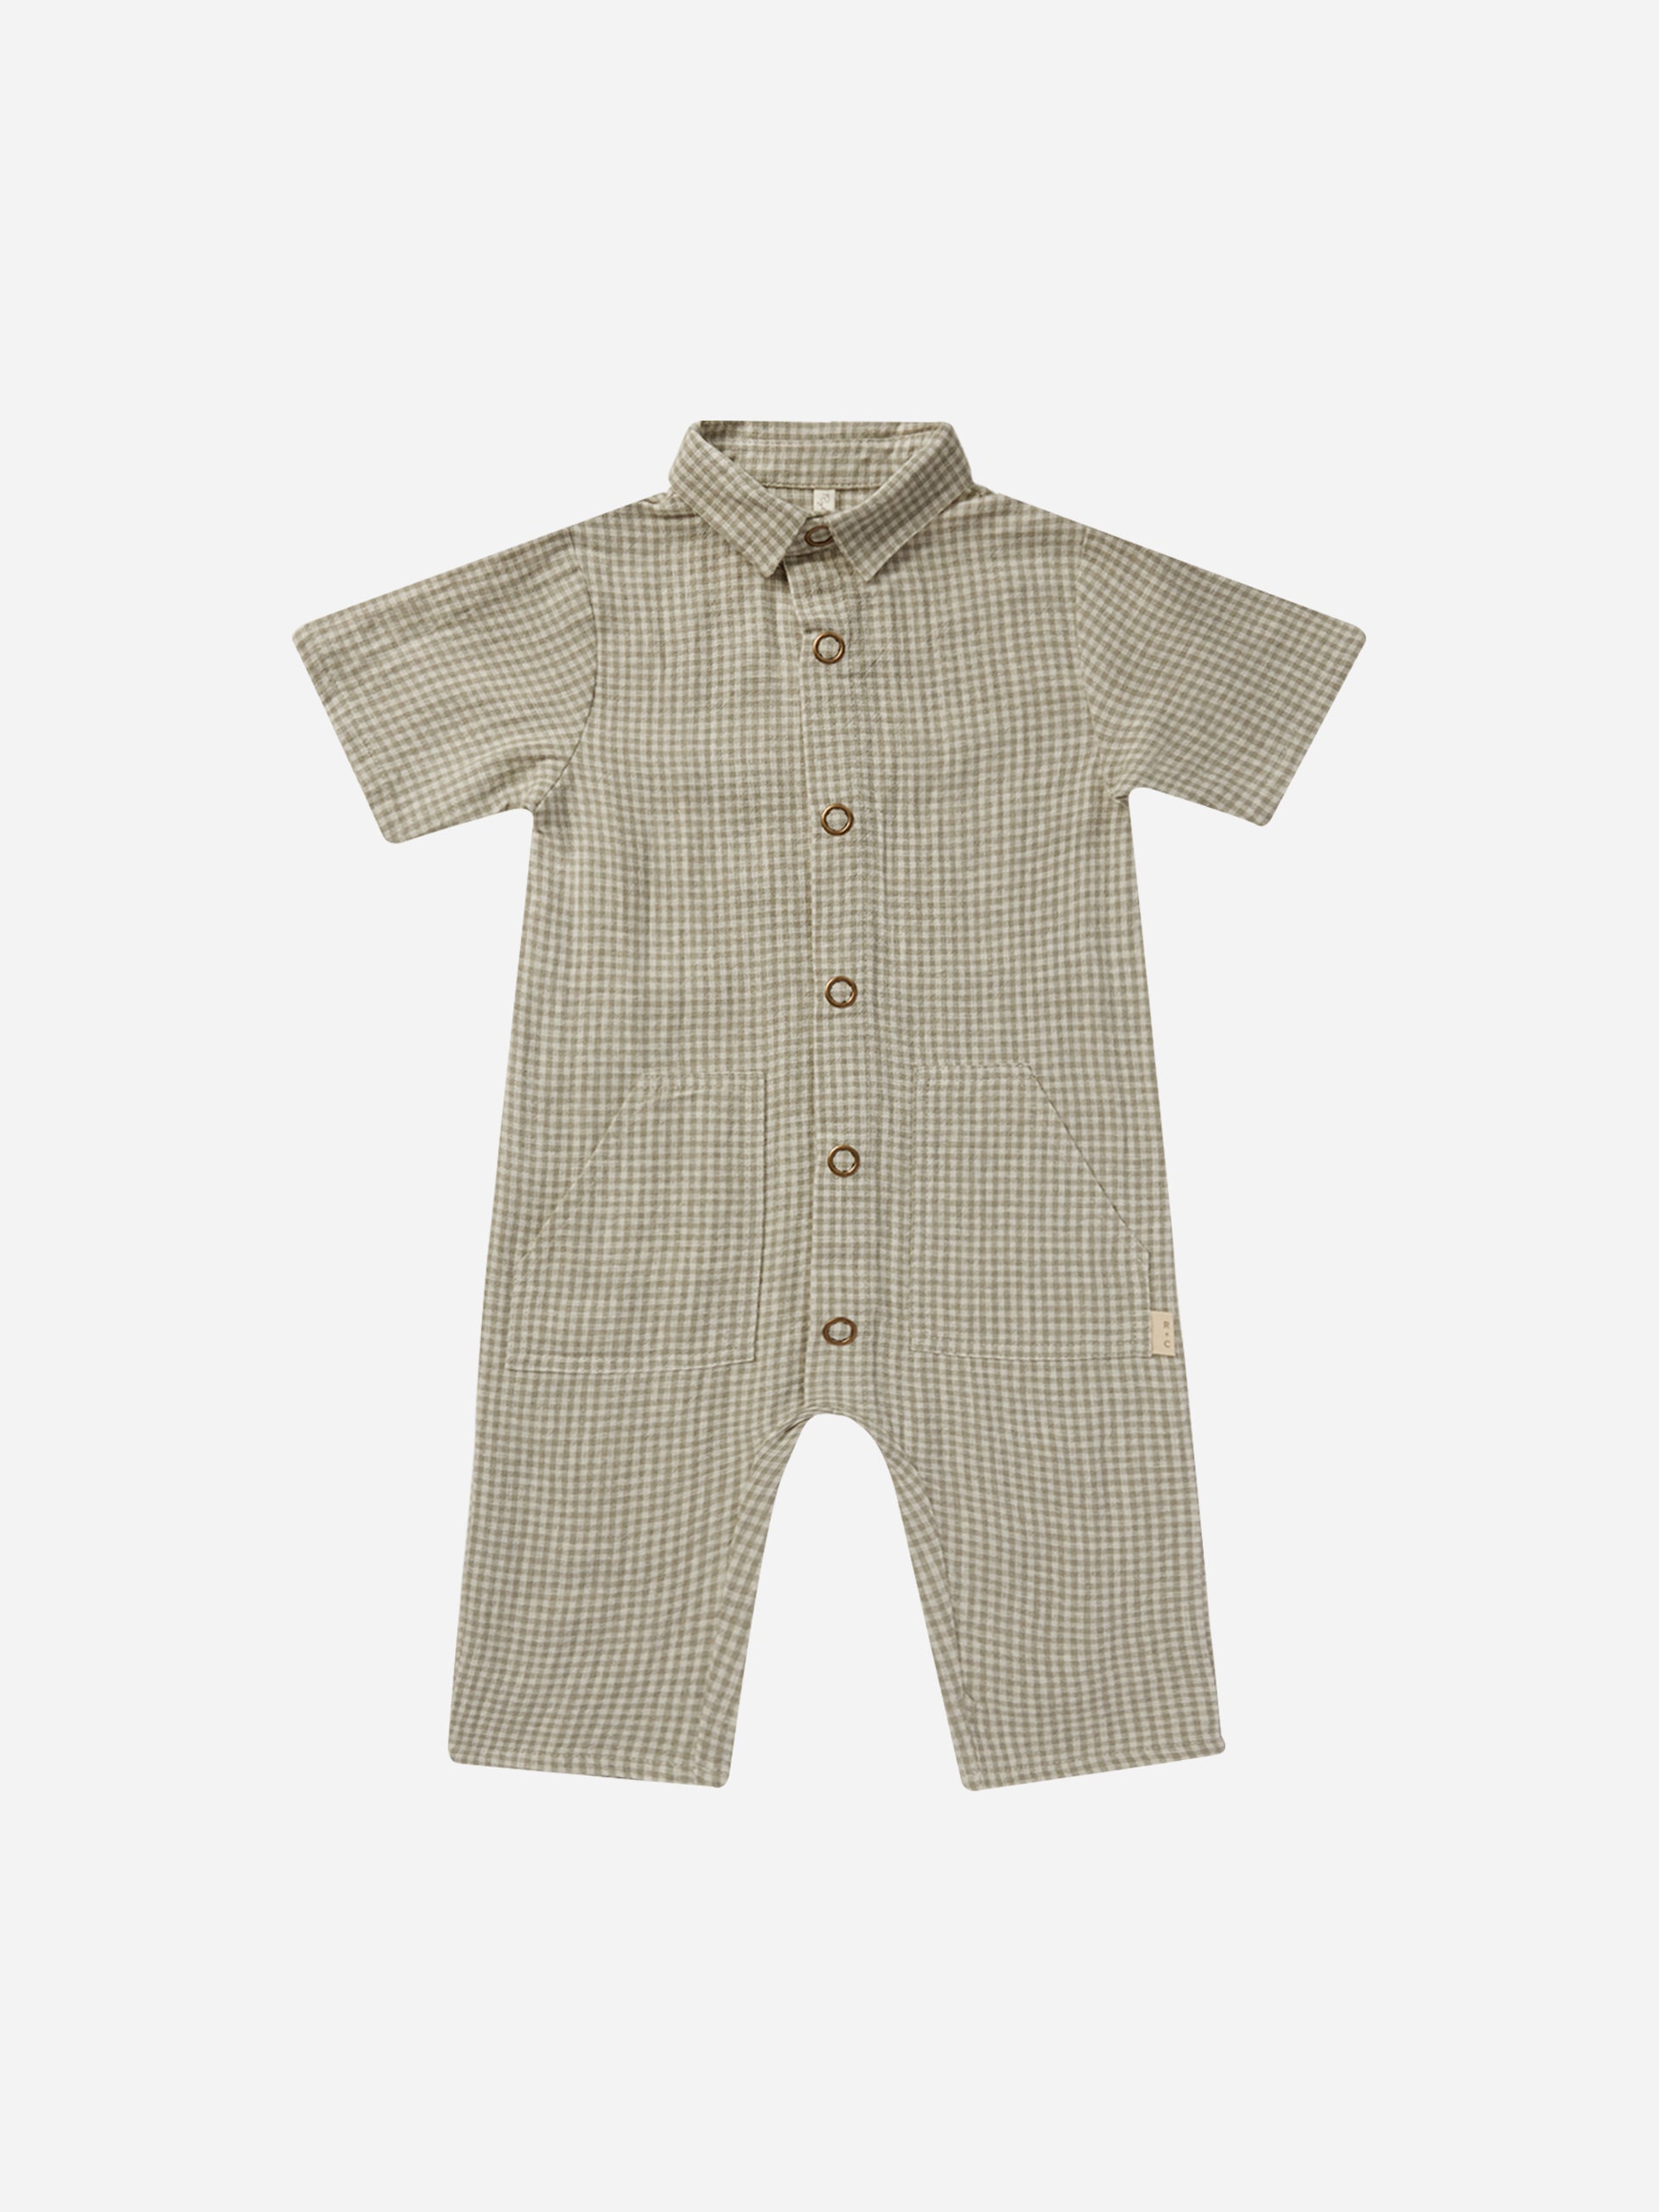 Rhett Jumpsuit || Sage Gingham - Rylee + Cru | Kids Clothes | Trendy Baby Clothes | Modern Infant Outfits |